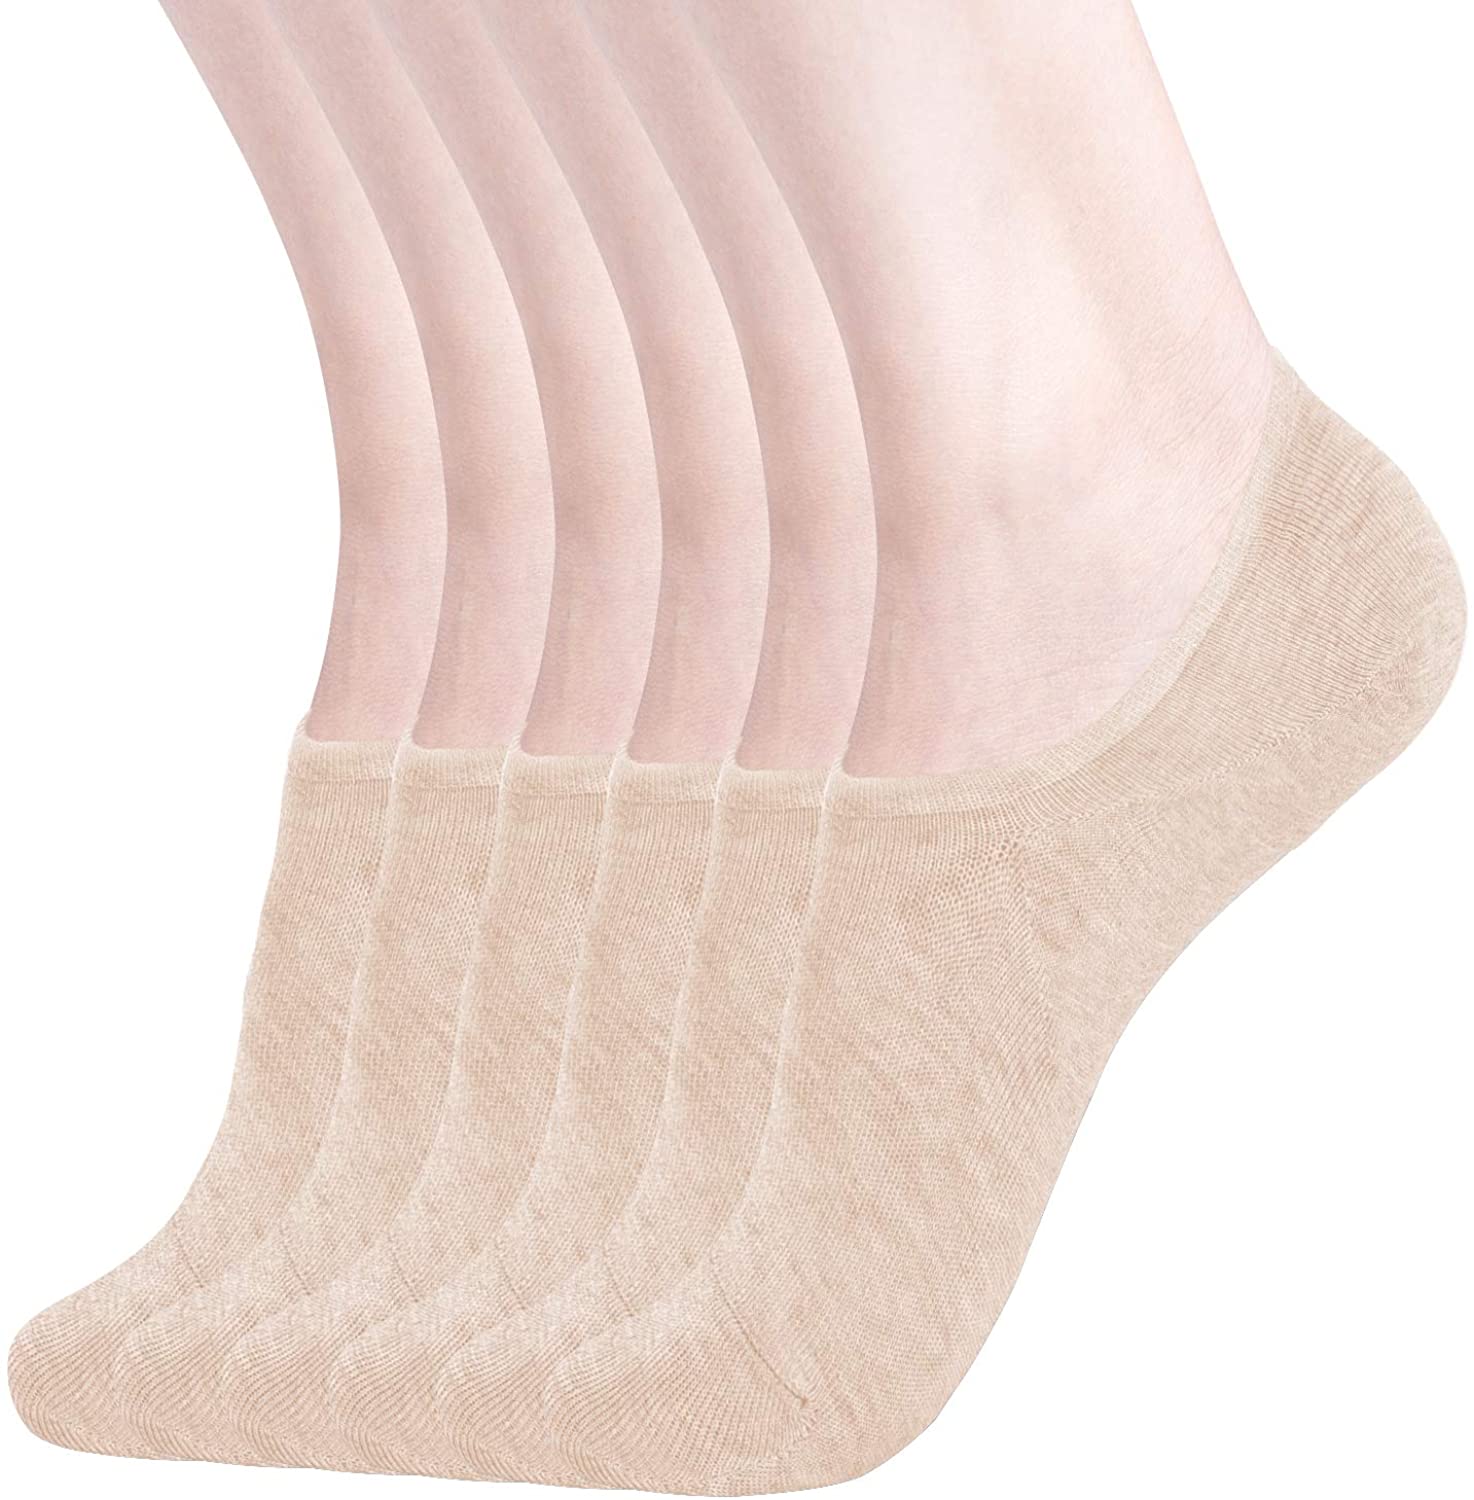 5 Pack Lace Cotton Non Slip Flat Boat Invisible Low Cut Liners Sports Ankle Socks Womens No Show Socks